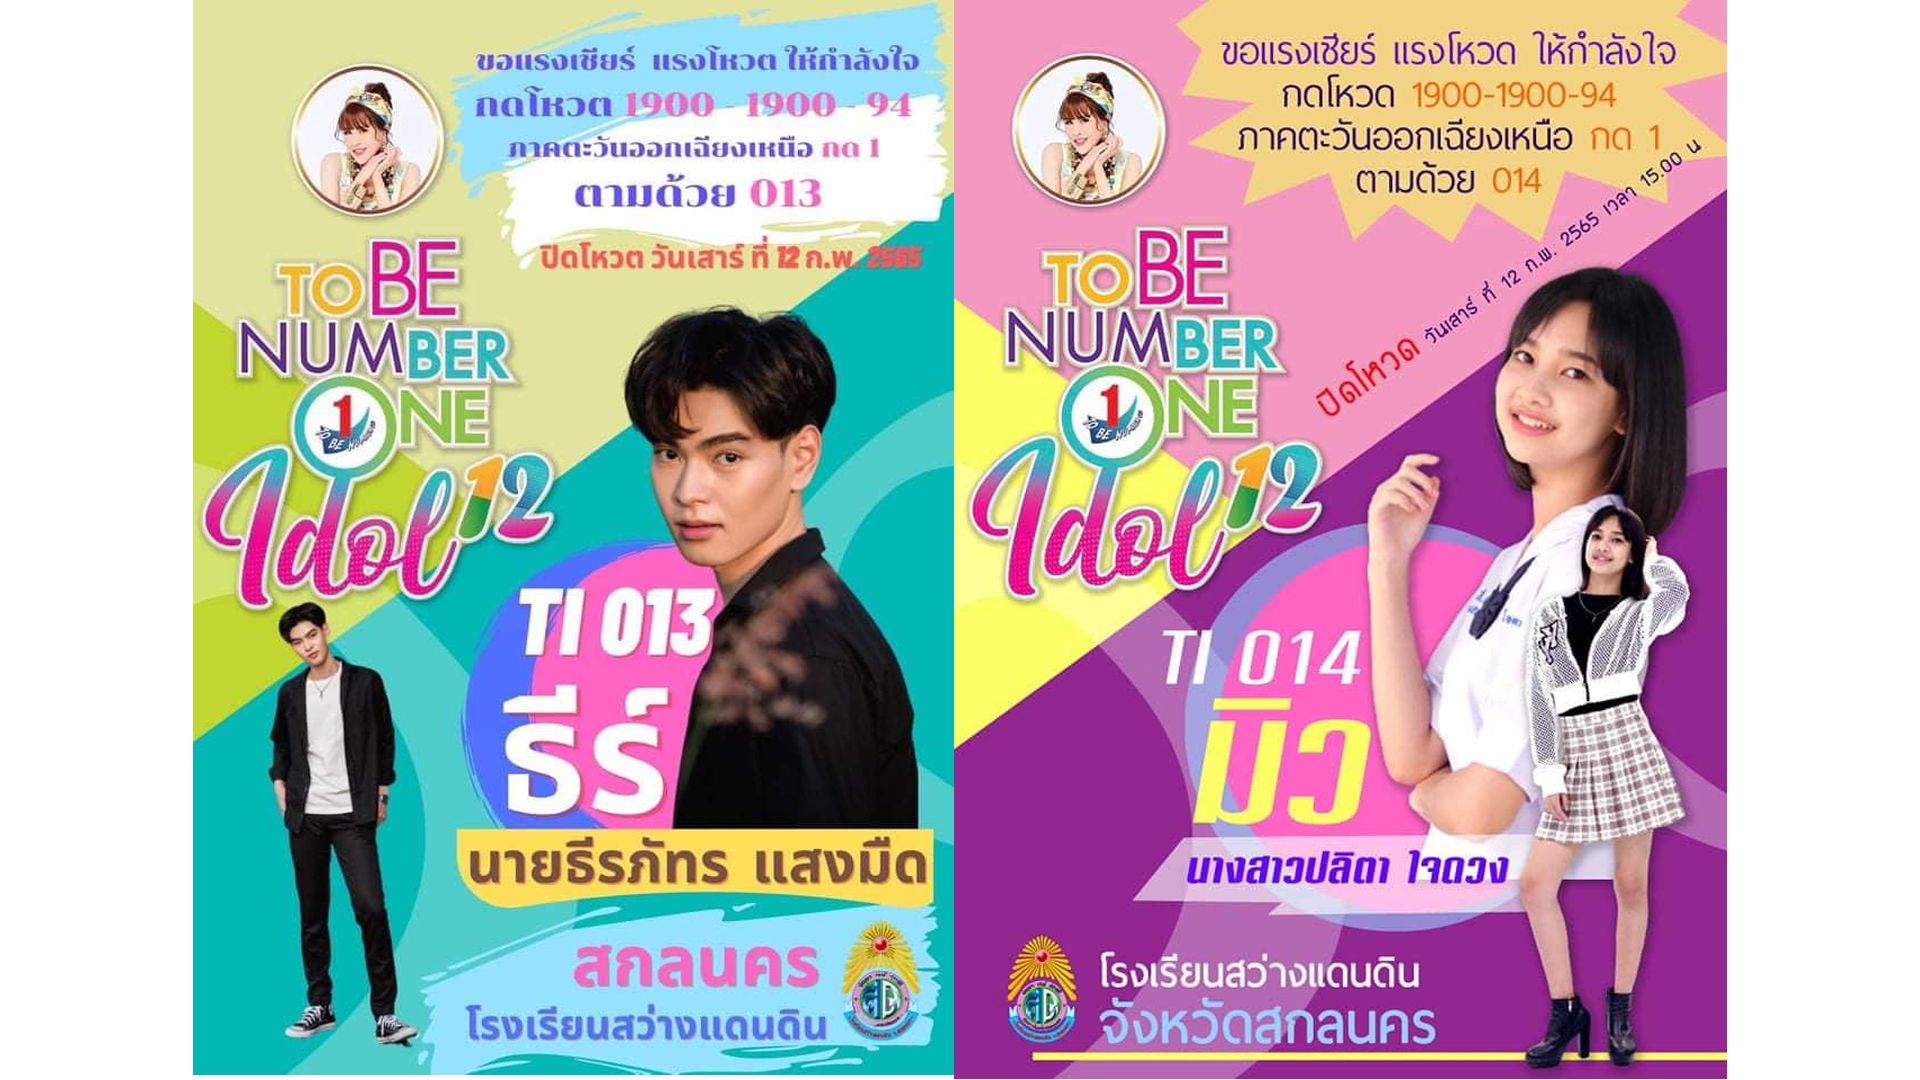 You are currently viewing ￼￼ขอแรงเชียร์ แรงโหวต ให้กำลังใจ￼￼ TO BE NUMBER ONE IDOL 12